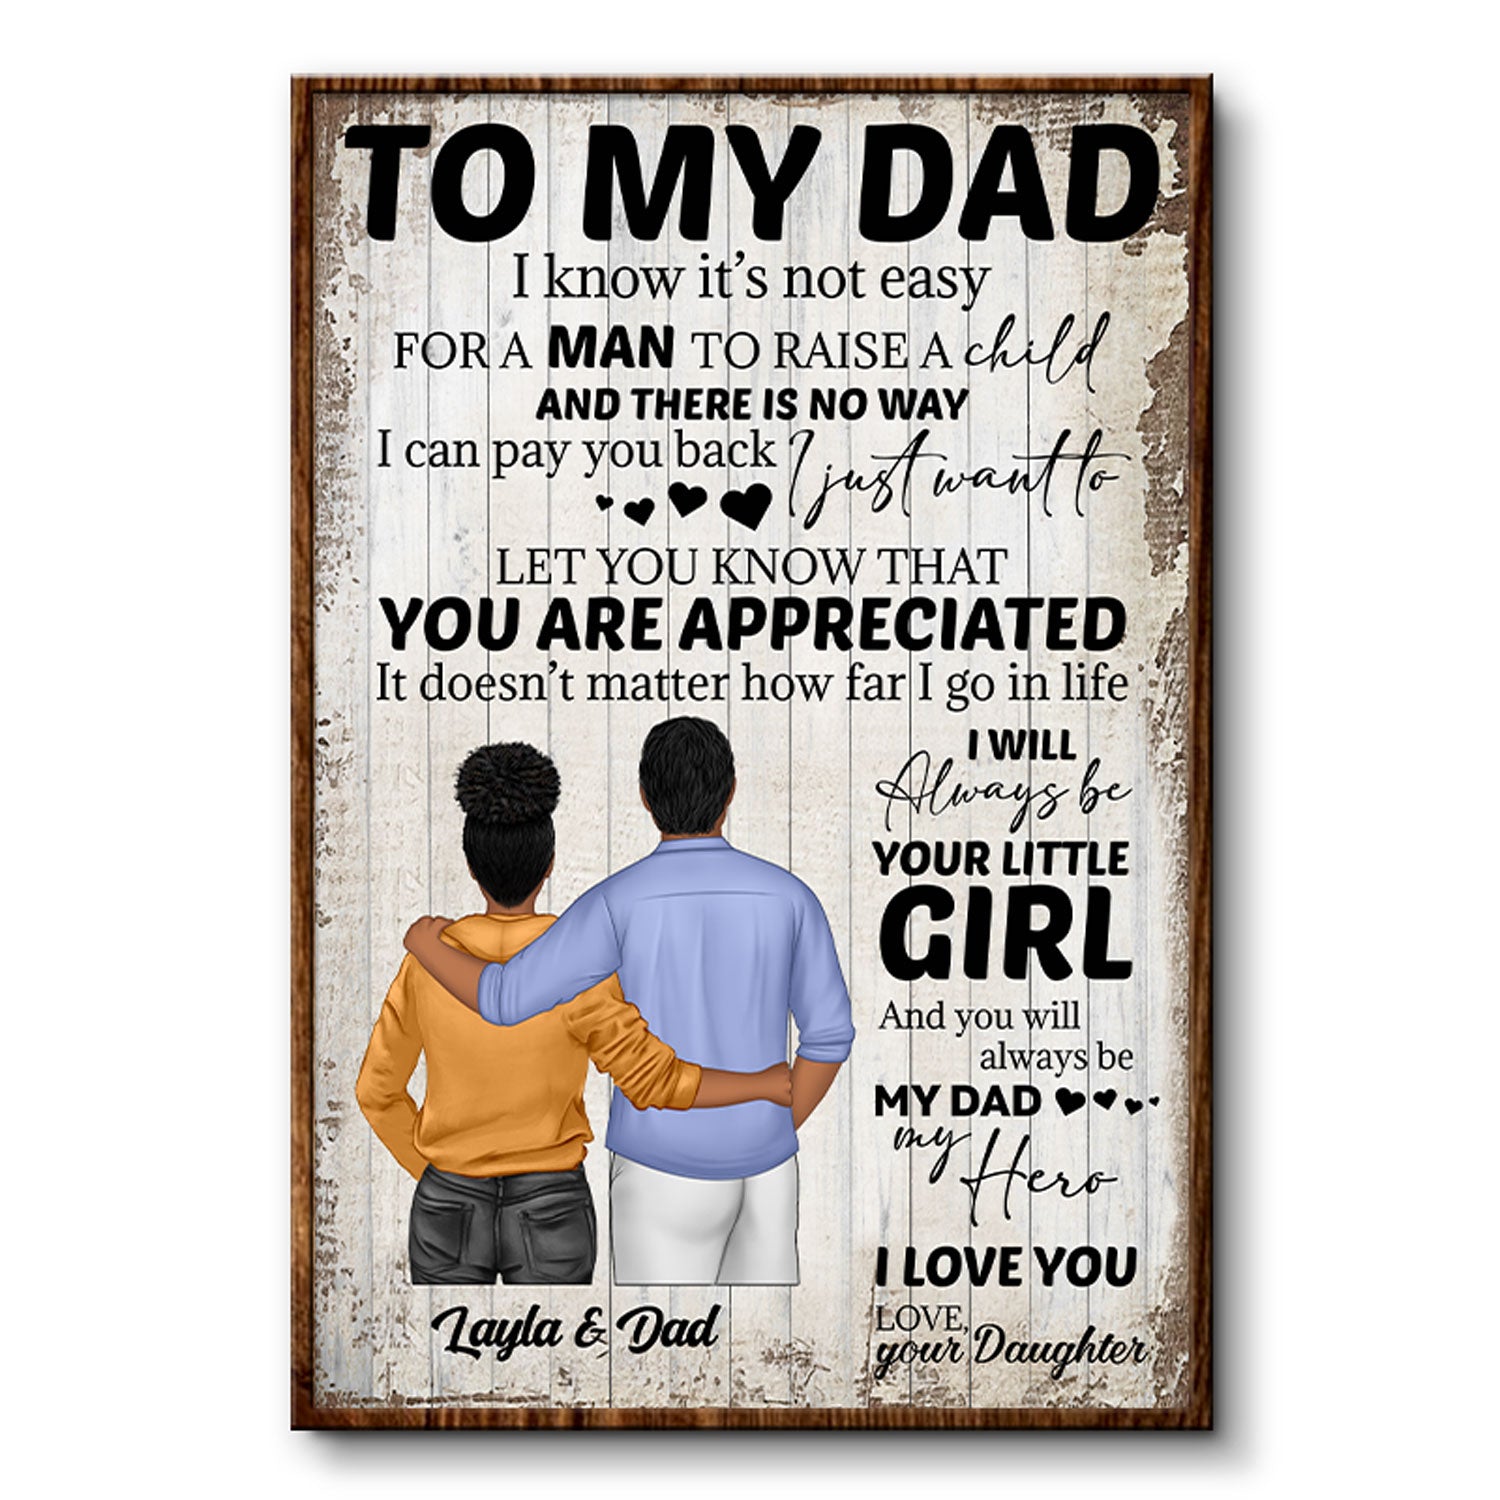 It's Not Easy For A Man To Raise - Gift For Father, Dad Gift - Personalized Custom Poster